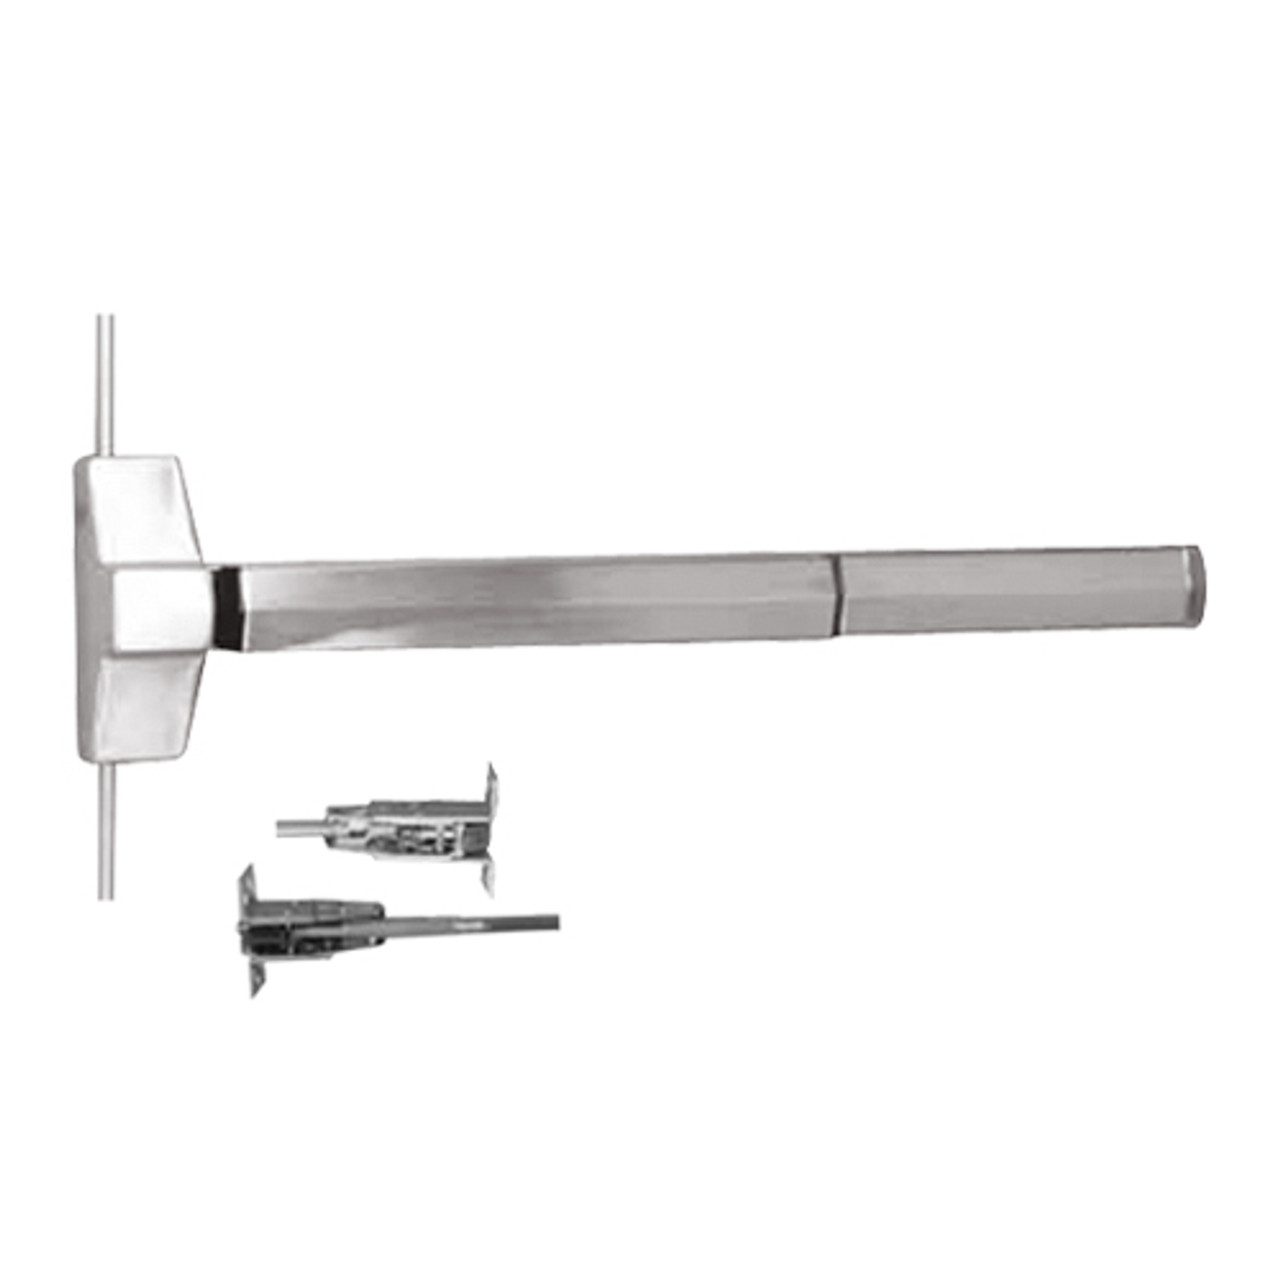 7120F-24-629 Yale 7000 Series Fire Rated Concealed Vertical Rod Exit Device in Bright Stainless Steel